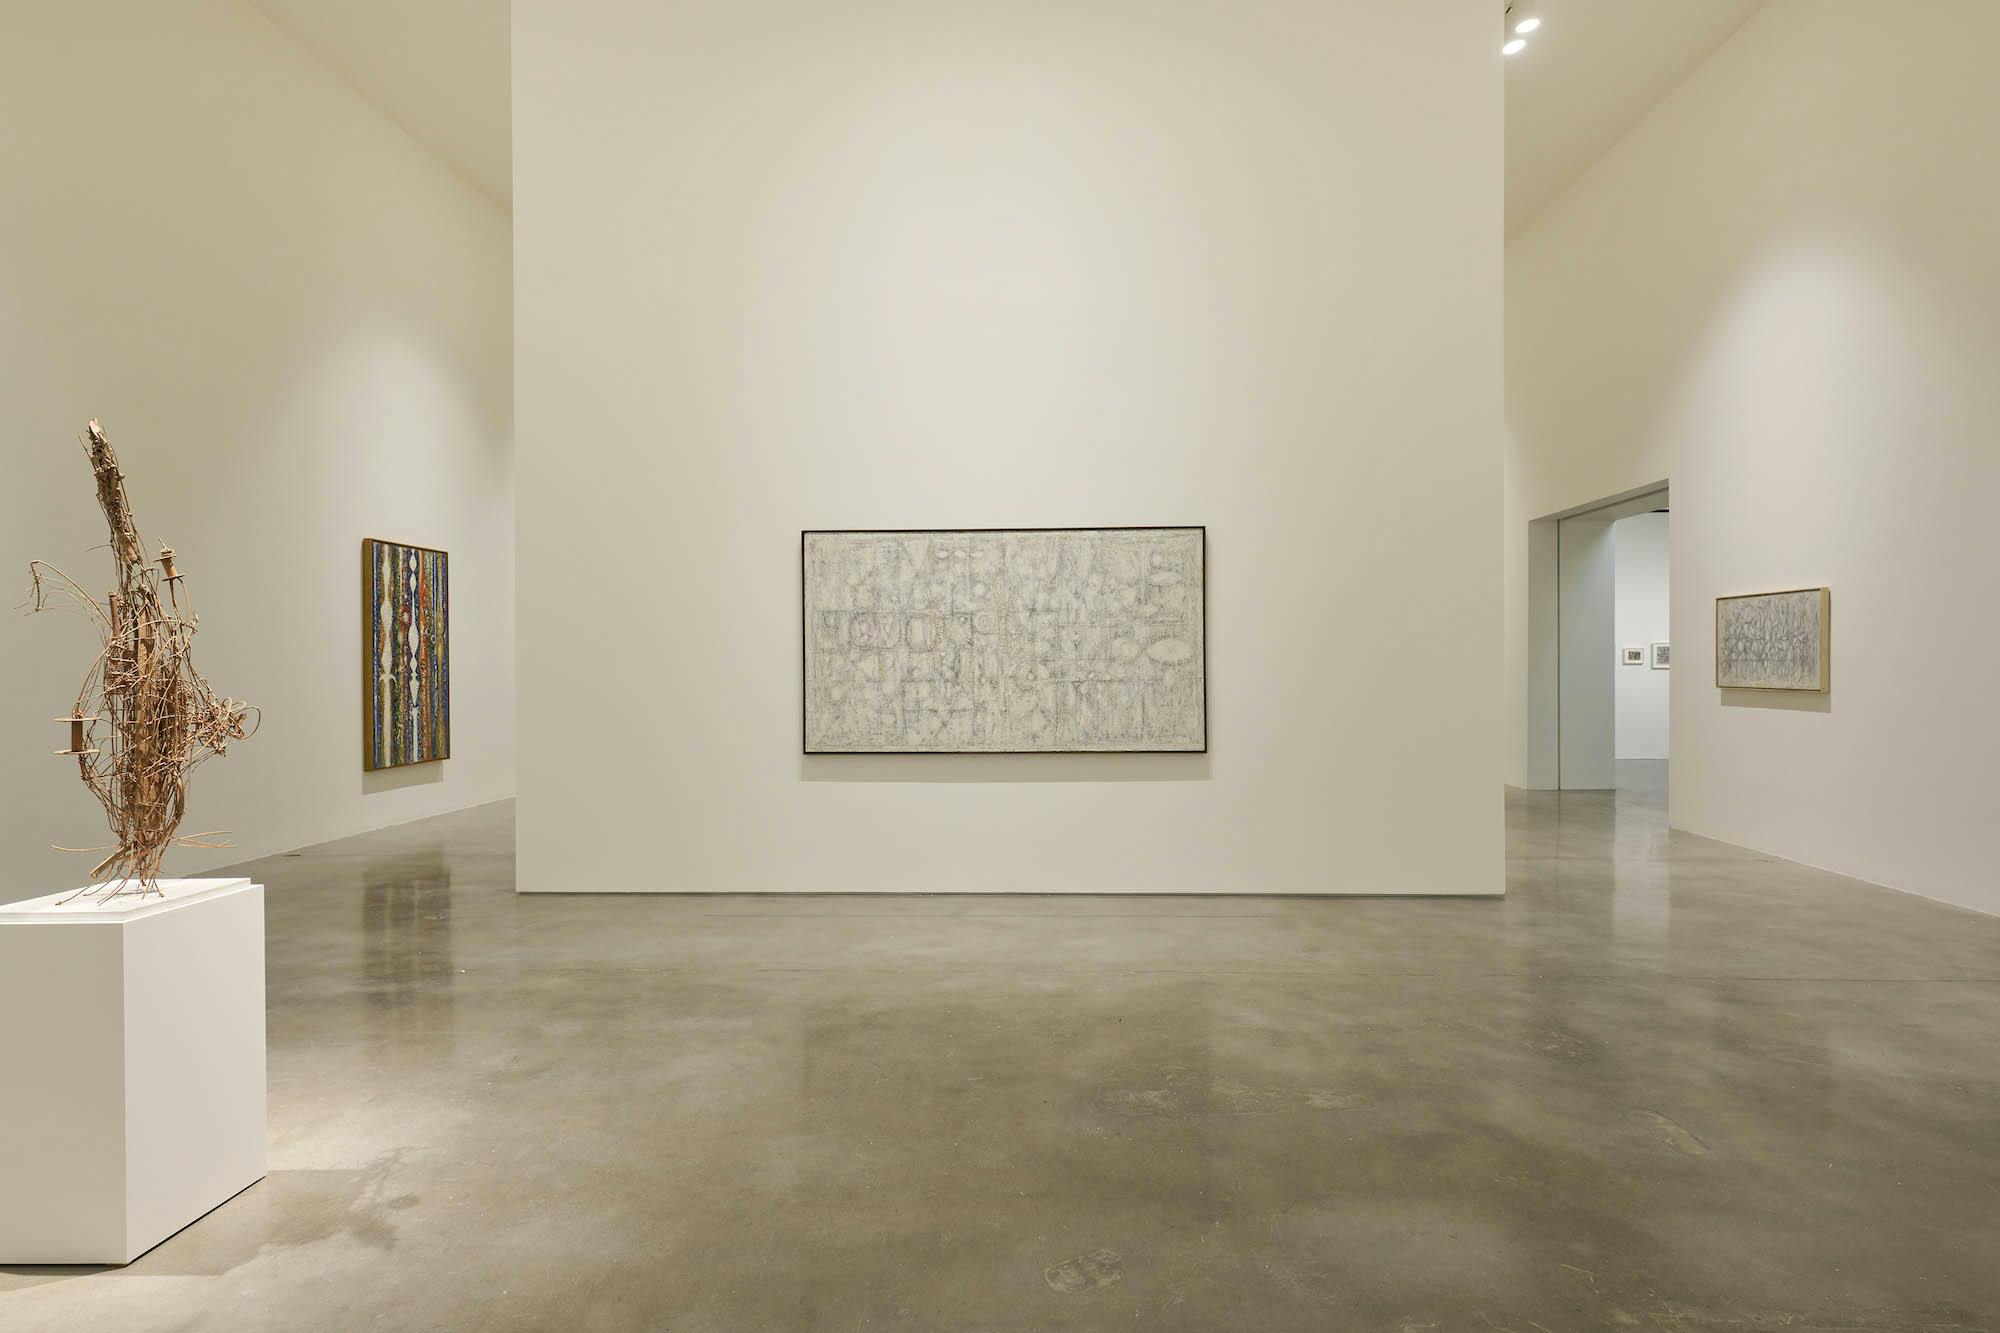 Installation view, Richard Pousette-Dart: Spirit and Substance, Pace Gallery, New York, NY, 2022. – The Richard Pousette-Dart Foundation